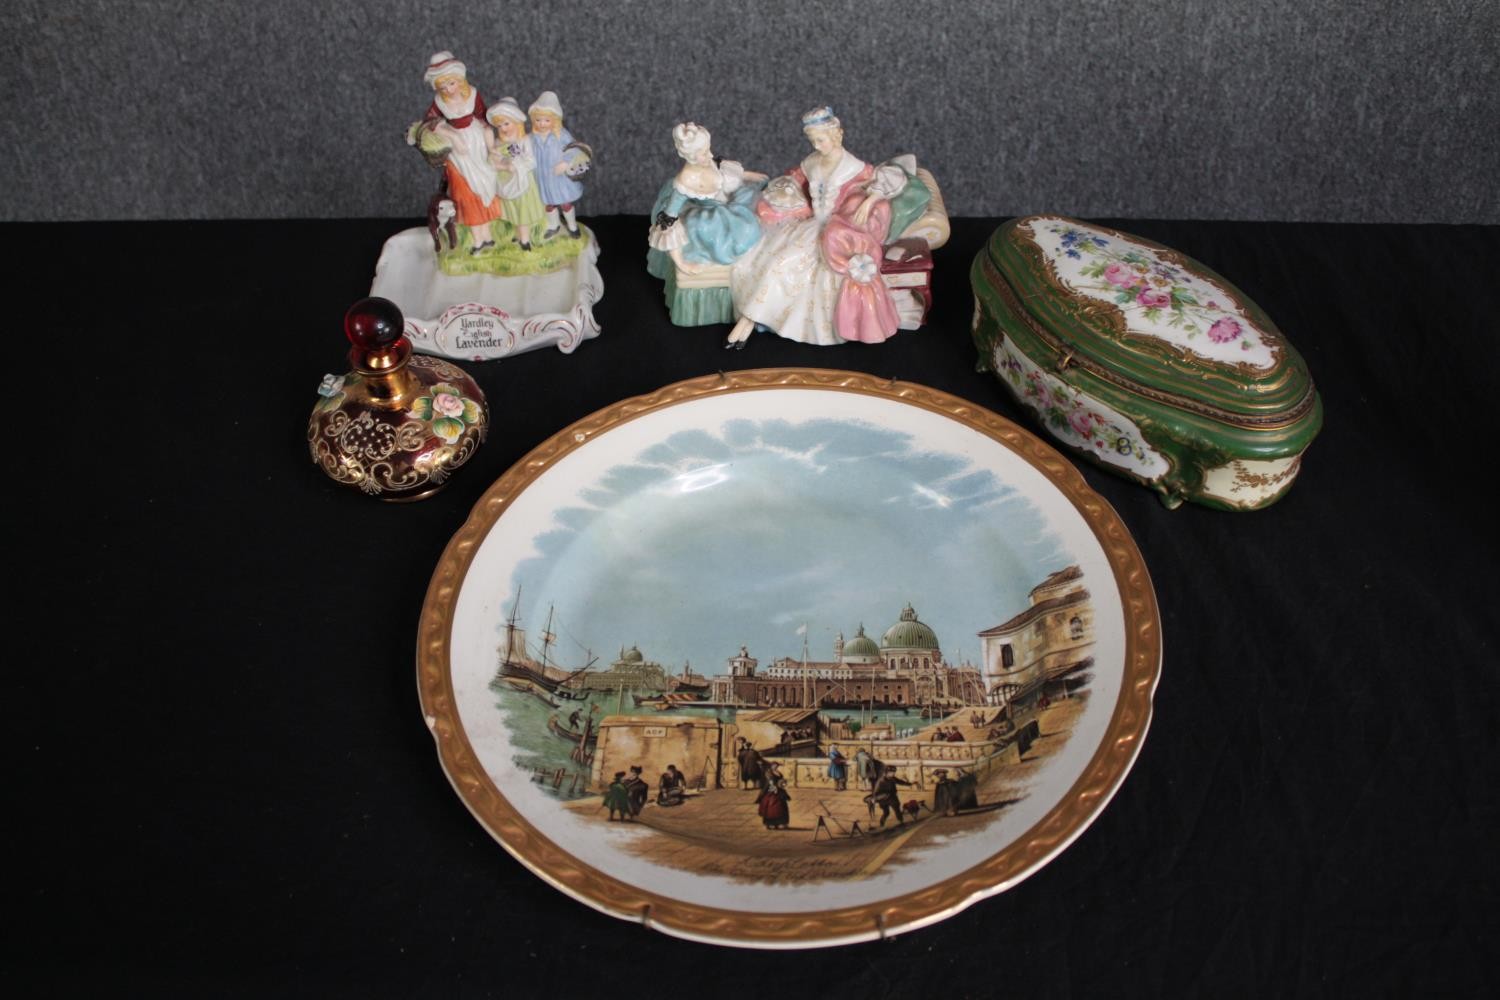 A mixed collection. A Yardley soap dish with porcelain figures and lidded glass bottle, decorative